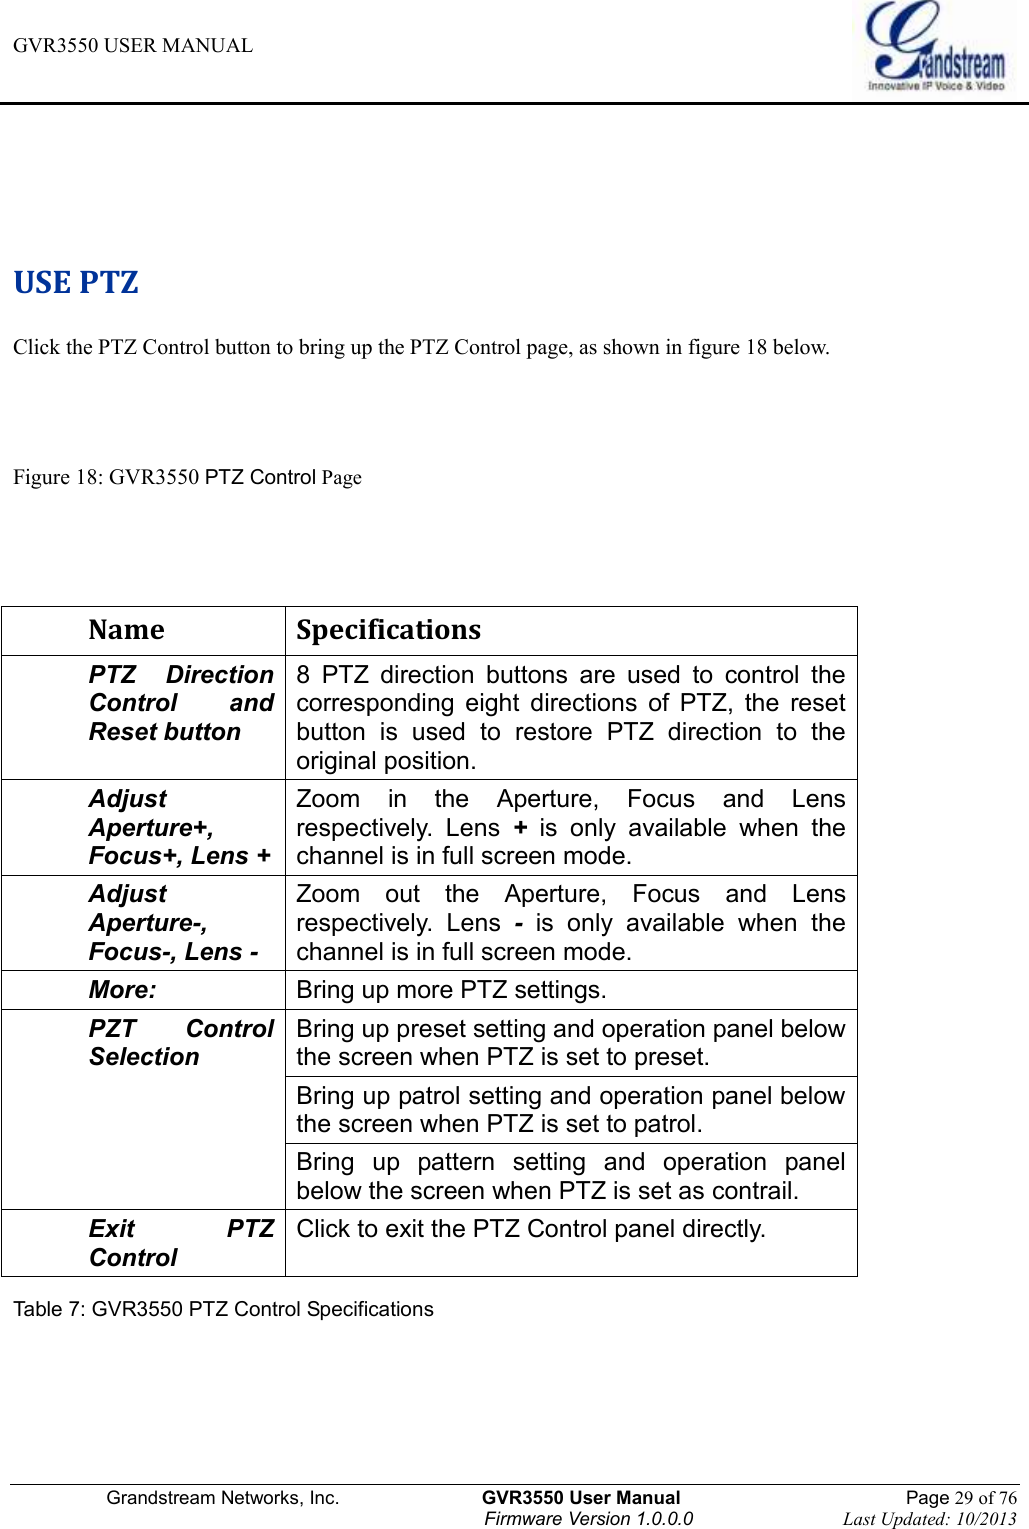 GVR3550 USER MANUAL   Grandstream Networks, Inc.                    GVR3550 User Manual                                                Page 29 of 76 Firmware Version 1.0.0.0                                Last Updated: 10/2013    USE PTZ Click the PTZ Control button to bring up the PTZ Control page, as shown in figure 18 below.   Figure 18: GVR3550 PTZ Control Page    Name Specifications PTZ  Direction Control  and Reset button 8  PTZ  direction  buttons  are  used  to  control  the corresponding  eight  directions  of  PTZ,  the  reset button  is  used  to  restore  PTZ  direction  to  the original position. Adjust Aperture+, Focus+, Lens + Zoom  in  the  Aperture,  Focus  and  Lens respectively.  Lens +  is  only  available  when  the channel is in full screen mode. Adjust Aperture-, Focus-, Lens - Zoom  out  the  Aperture,  Focus  and  Lens respectively.  Lens -  is  only  available  when  the channel is in full screen mode. More: Bring up more PTZ settings. PZT  Control Selection Bring up preset setting and operation panel below the screen when PTZ is set to preset.   Bring up patrol setting and operation panel below the screen when PTZ is set to patrol. Bring  up  pattern  setting  and  operation  panel below the screen when PTZ is set as contrail. Exit  PTZ Control   Click to exit the PTZ Control panel directly. Table 7: GVR3550 PTZ Control Specifications   